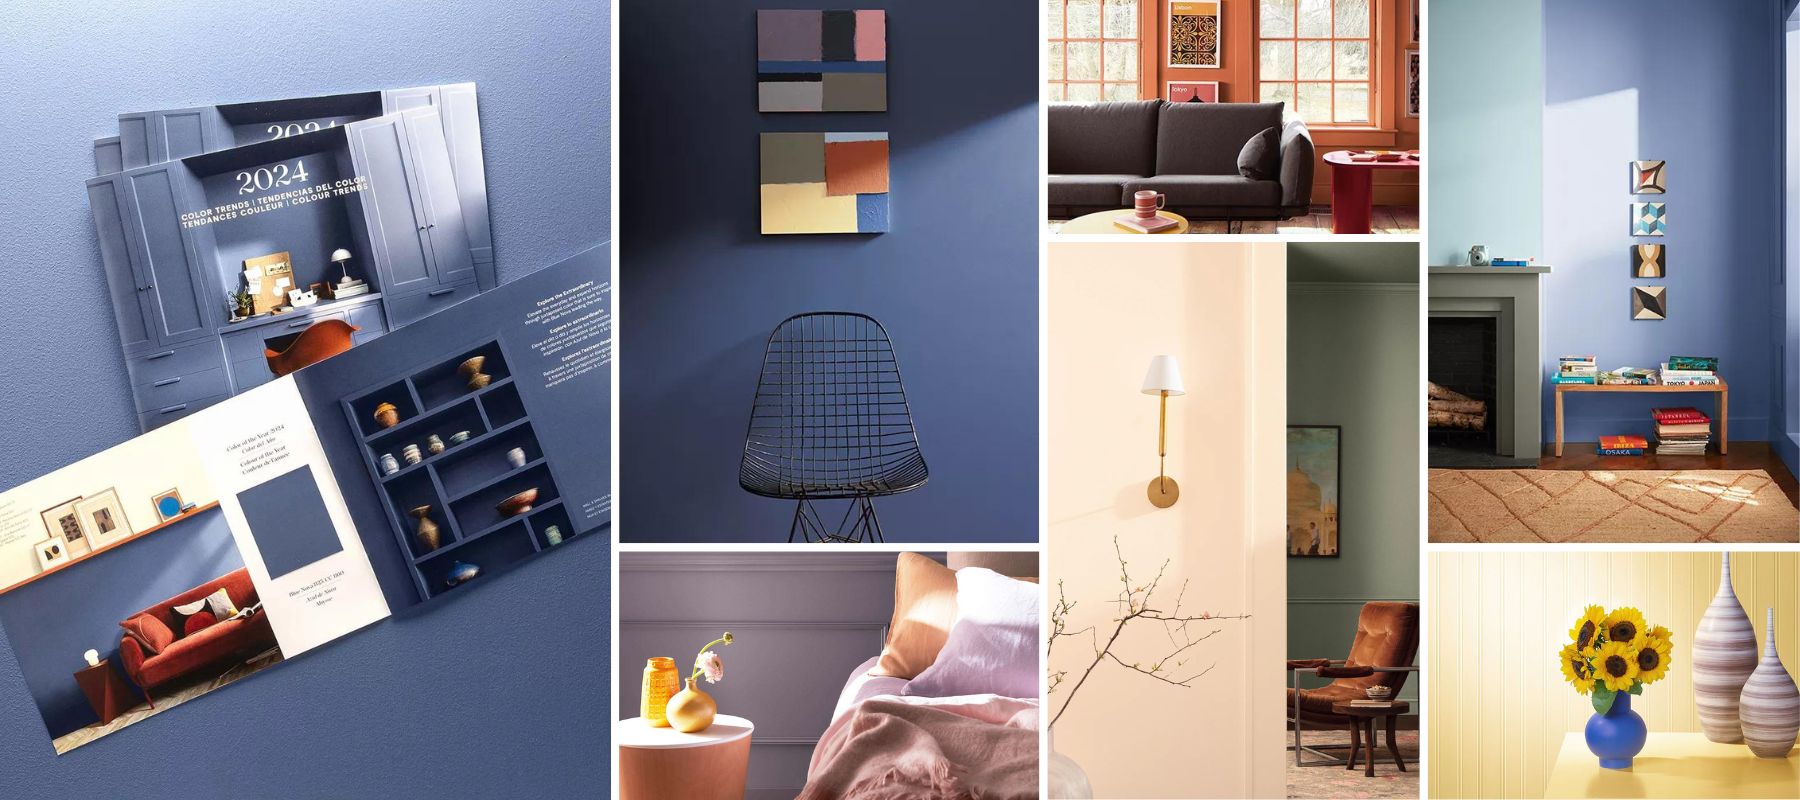 Find Benjamin Moore's Color of the Year at Johnson Paint in Massachusetts, New Hampshire & Maine.